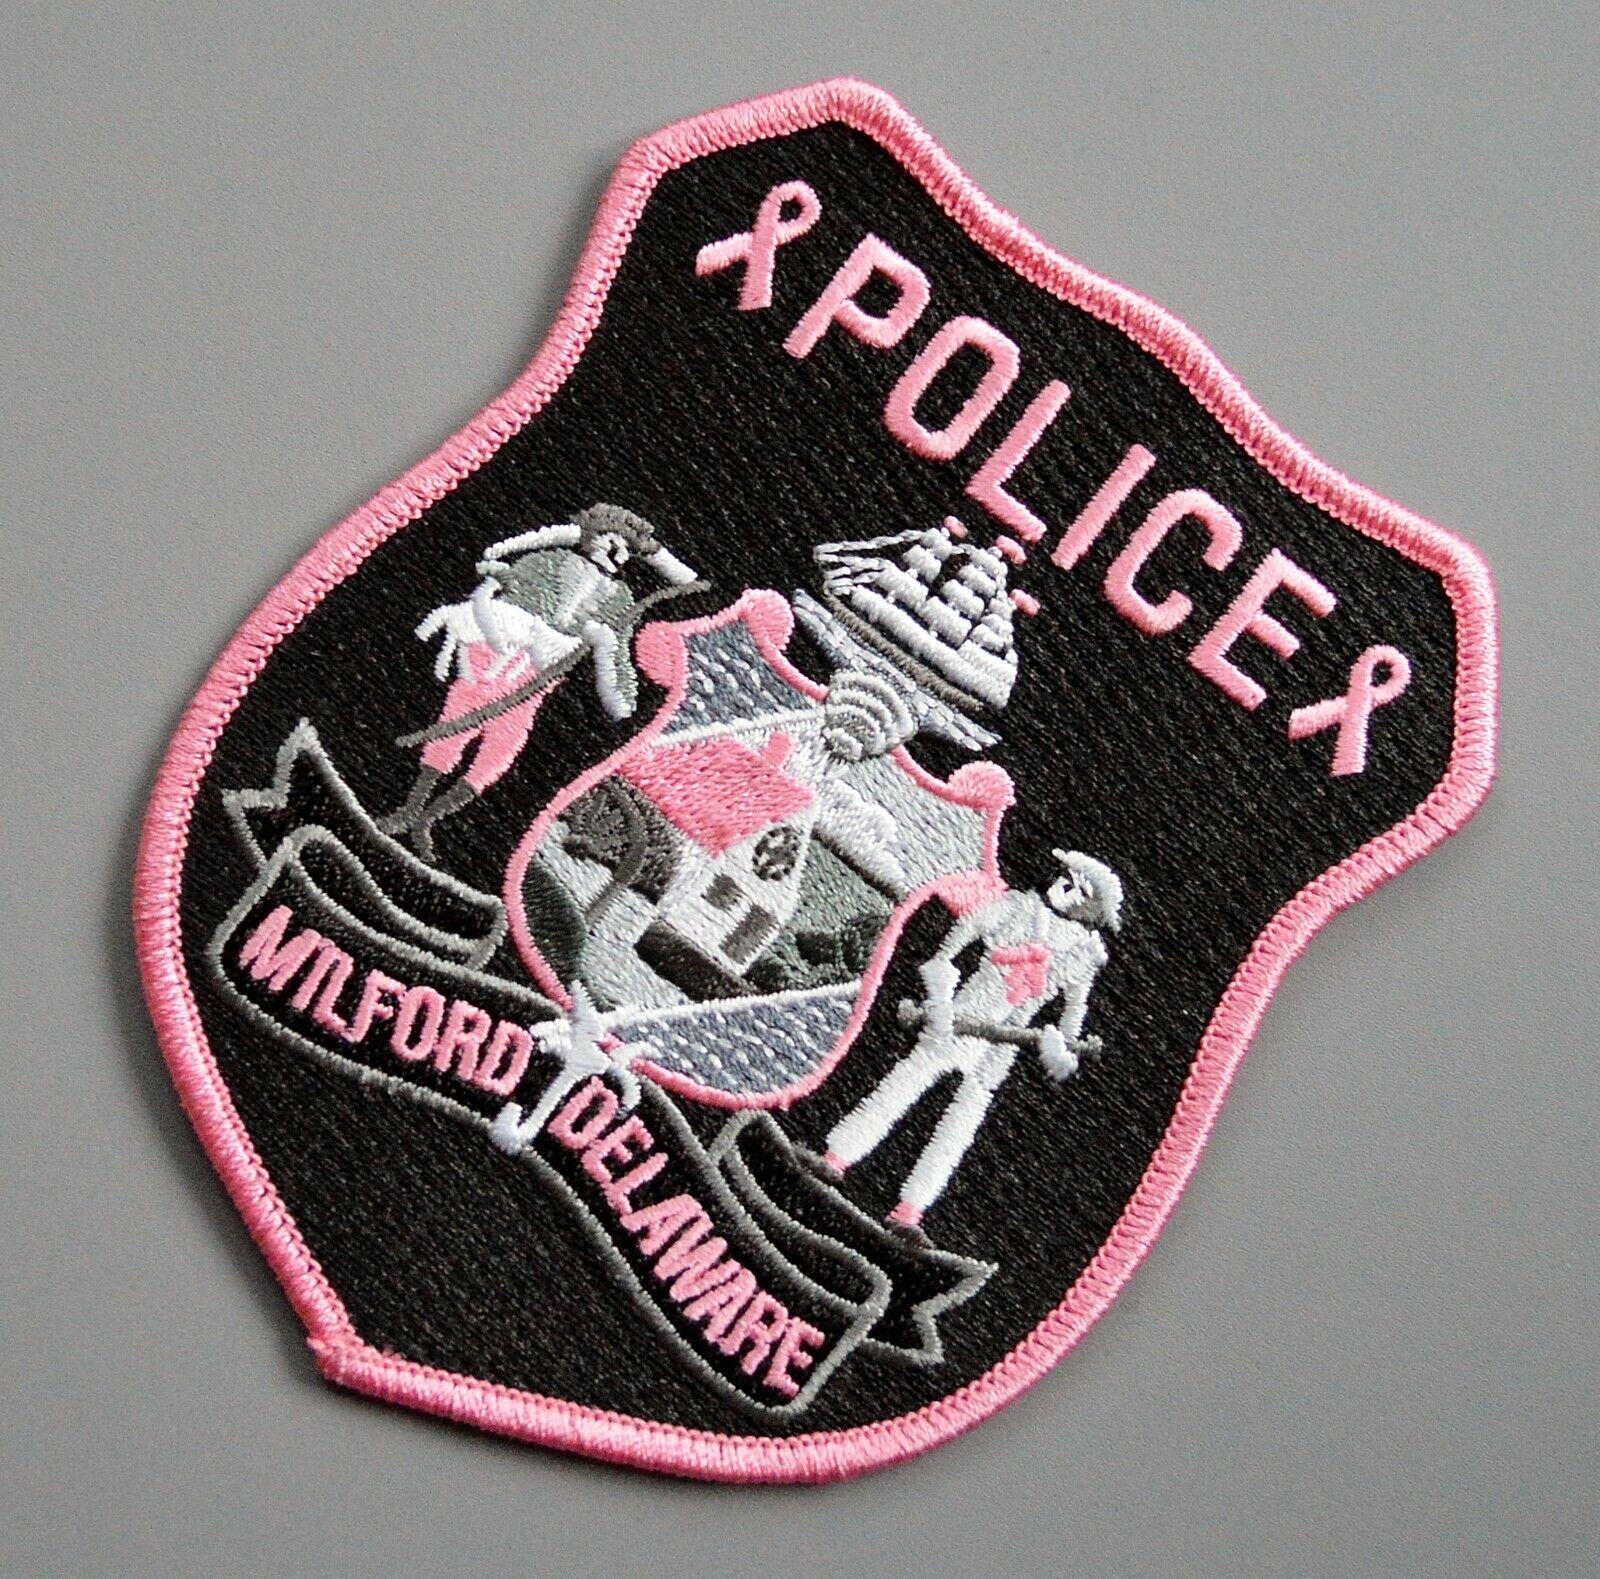 Milford Delaware Pink Police Patch +++ Breast Cancer Awareness De